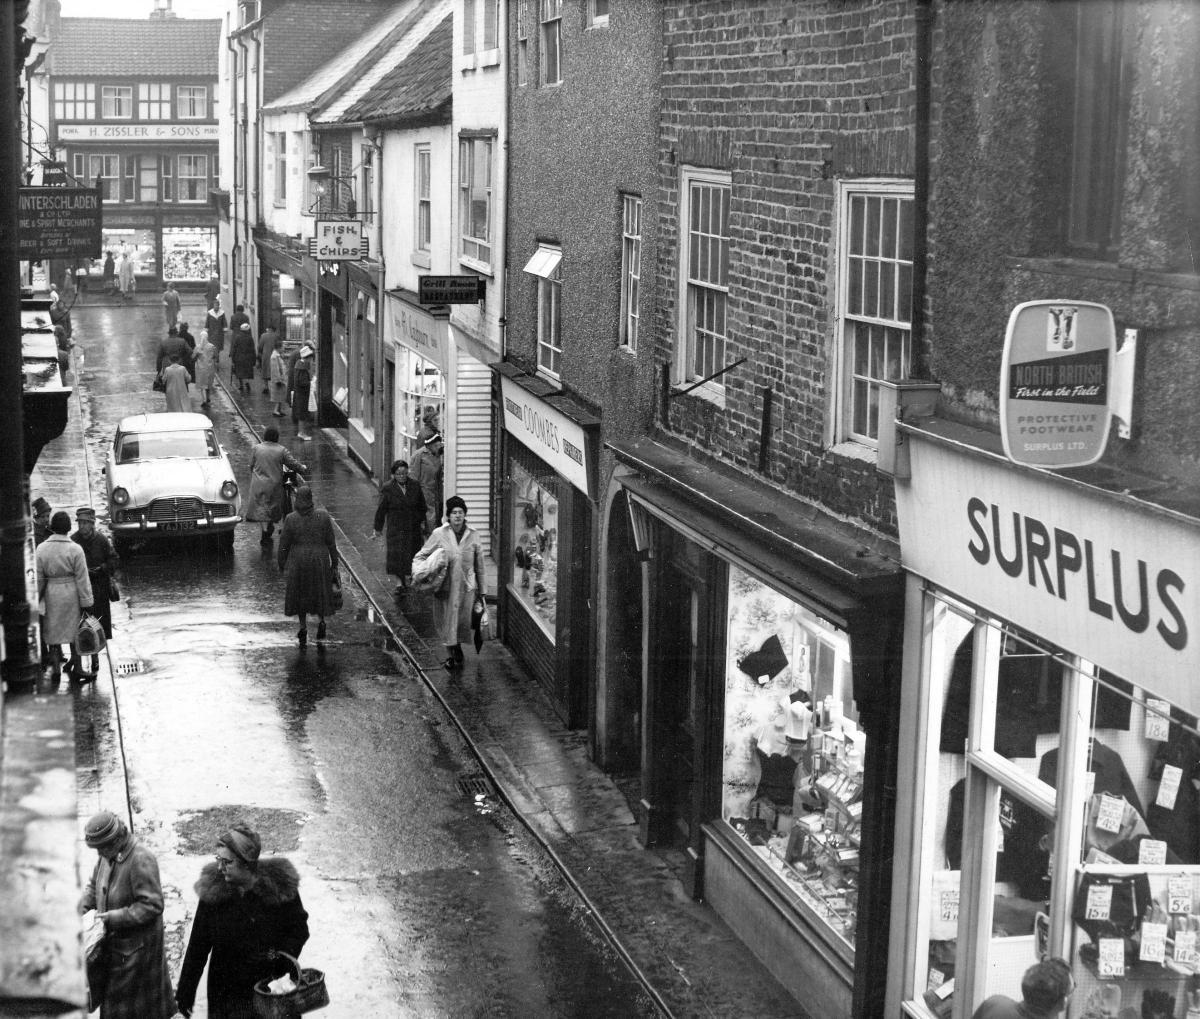 WET DAY IN THE WYND: Post House Wynd, Darlington, on December 7, 1961, when cars had unrestricted access to this narrow street